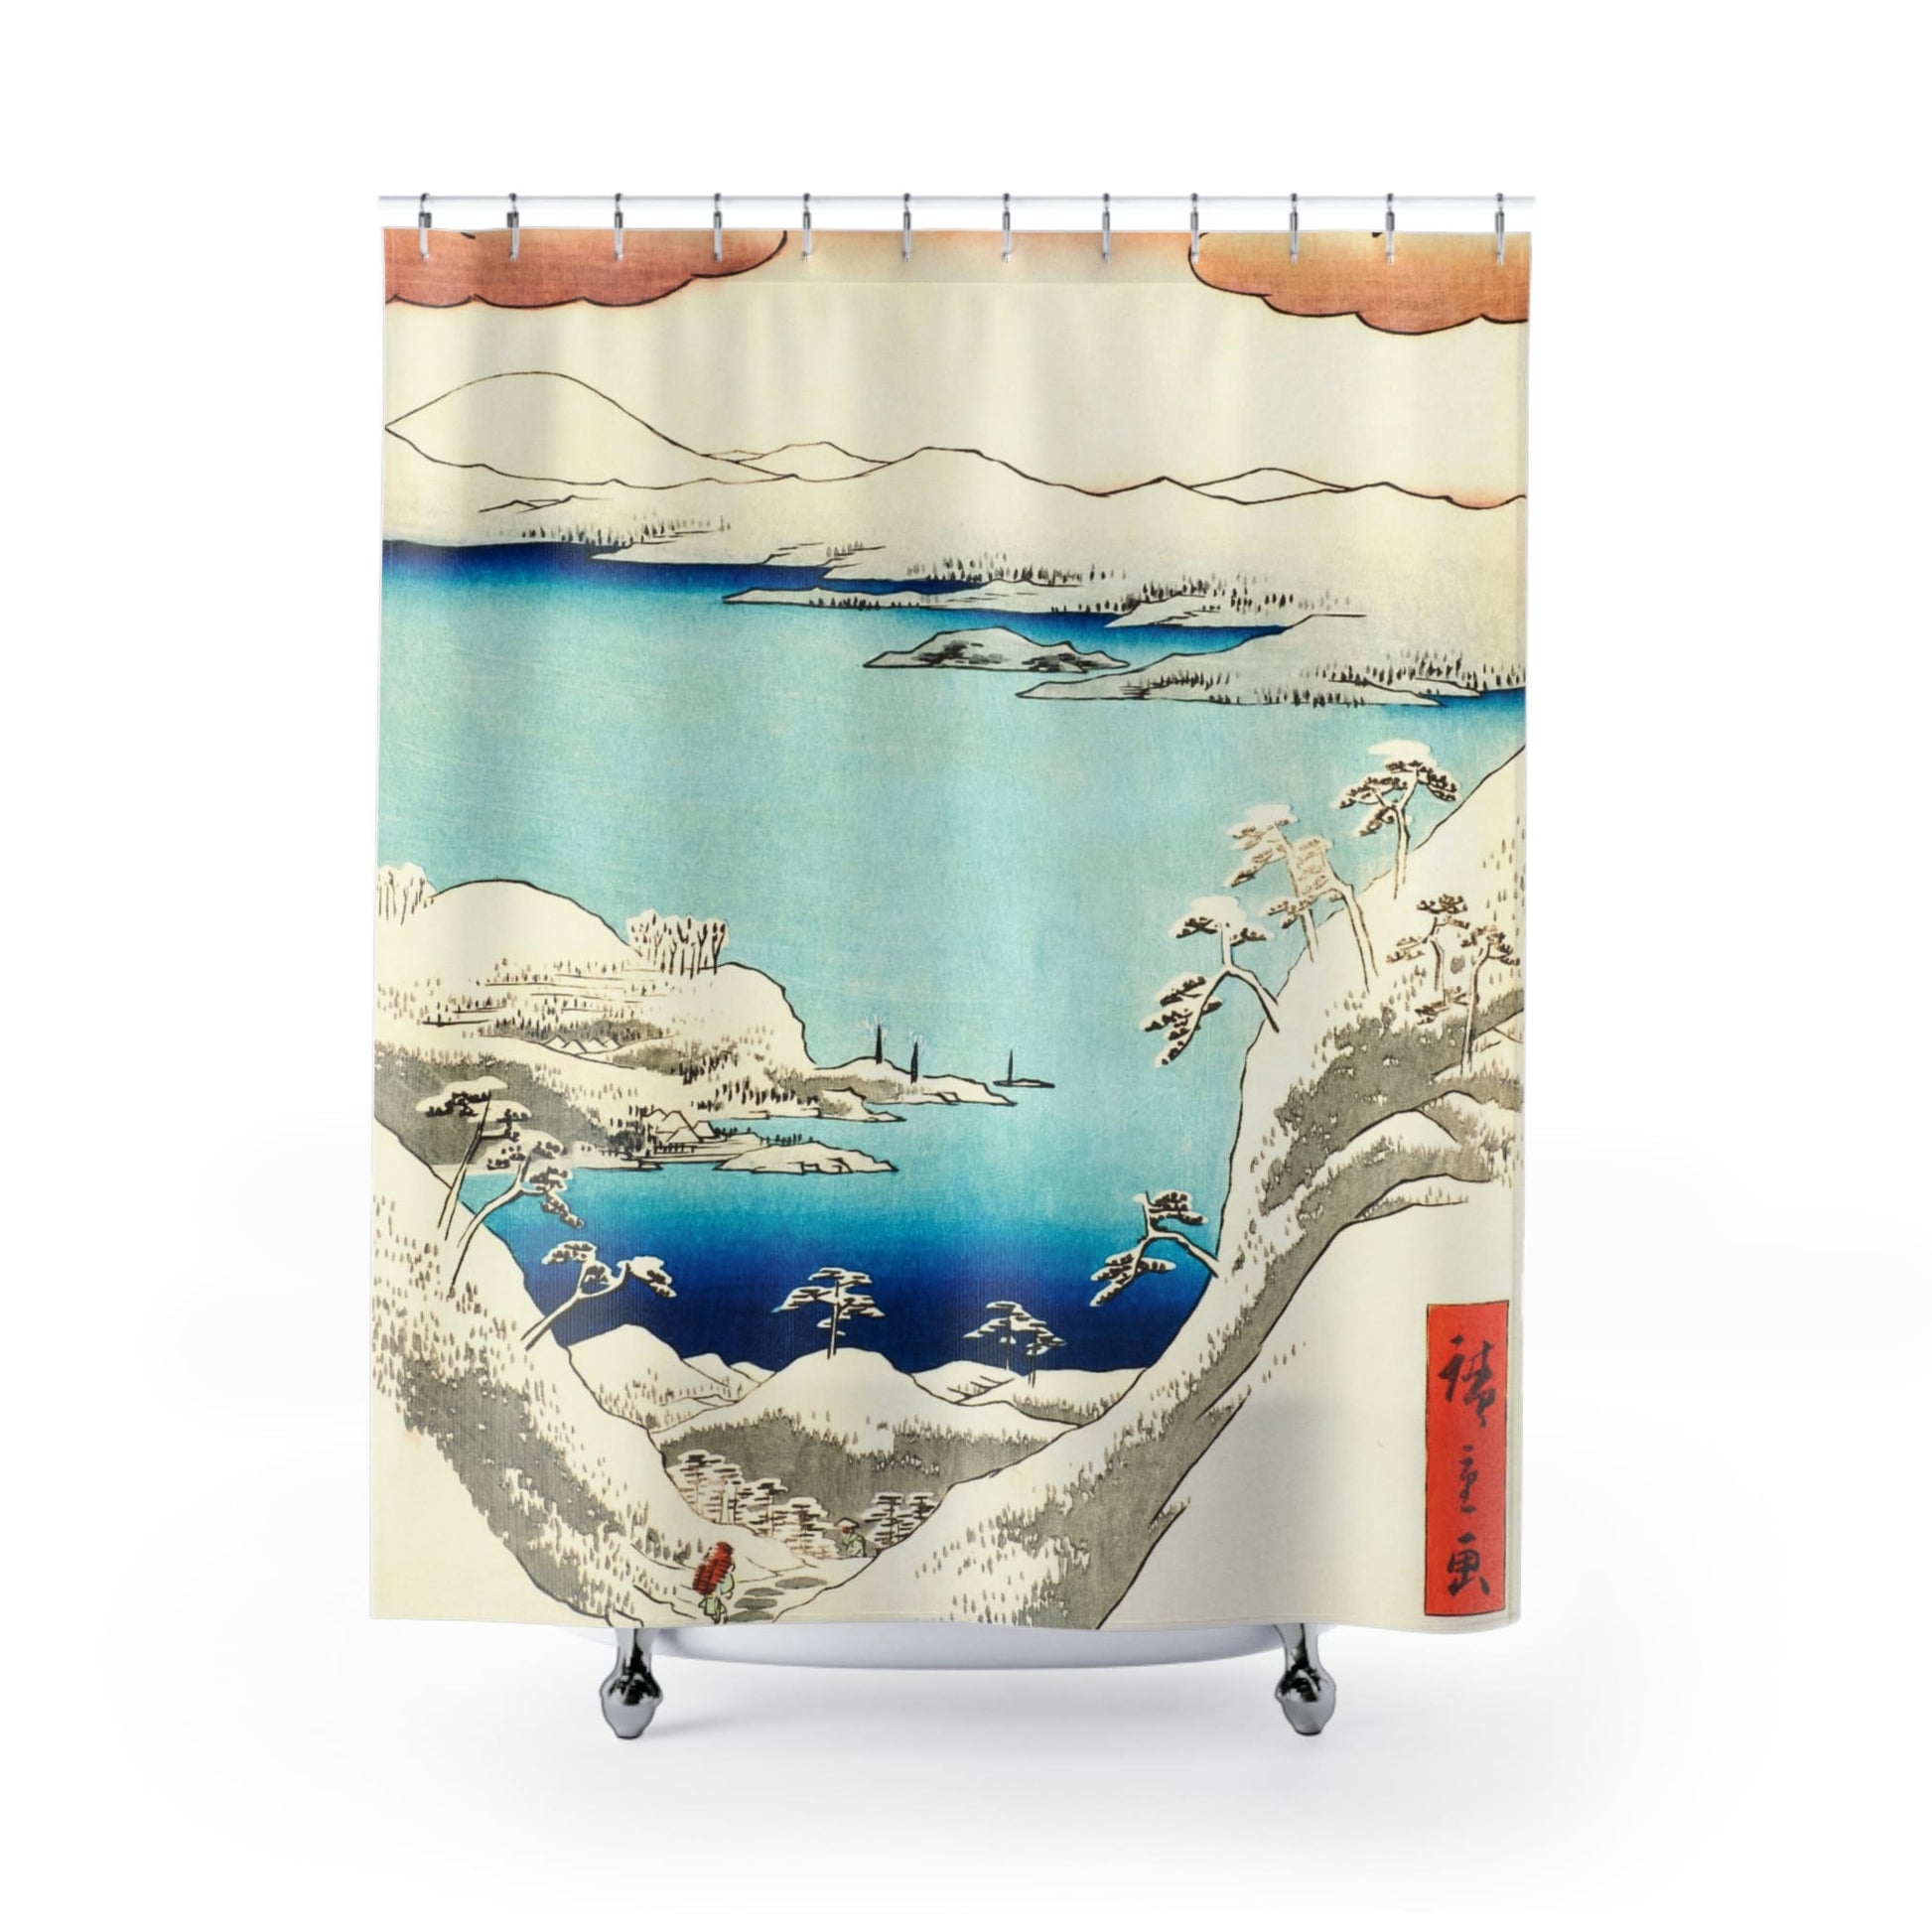 Japanese Winter Shower Curtain with mountains design, scenic bathroom decor featuring traditional Japanese winter landscapes.